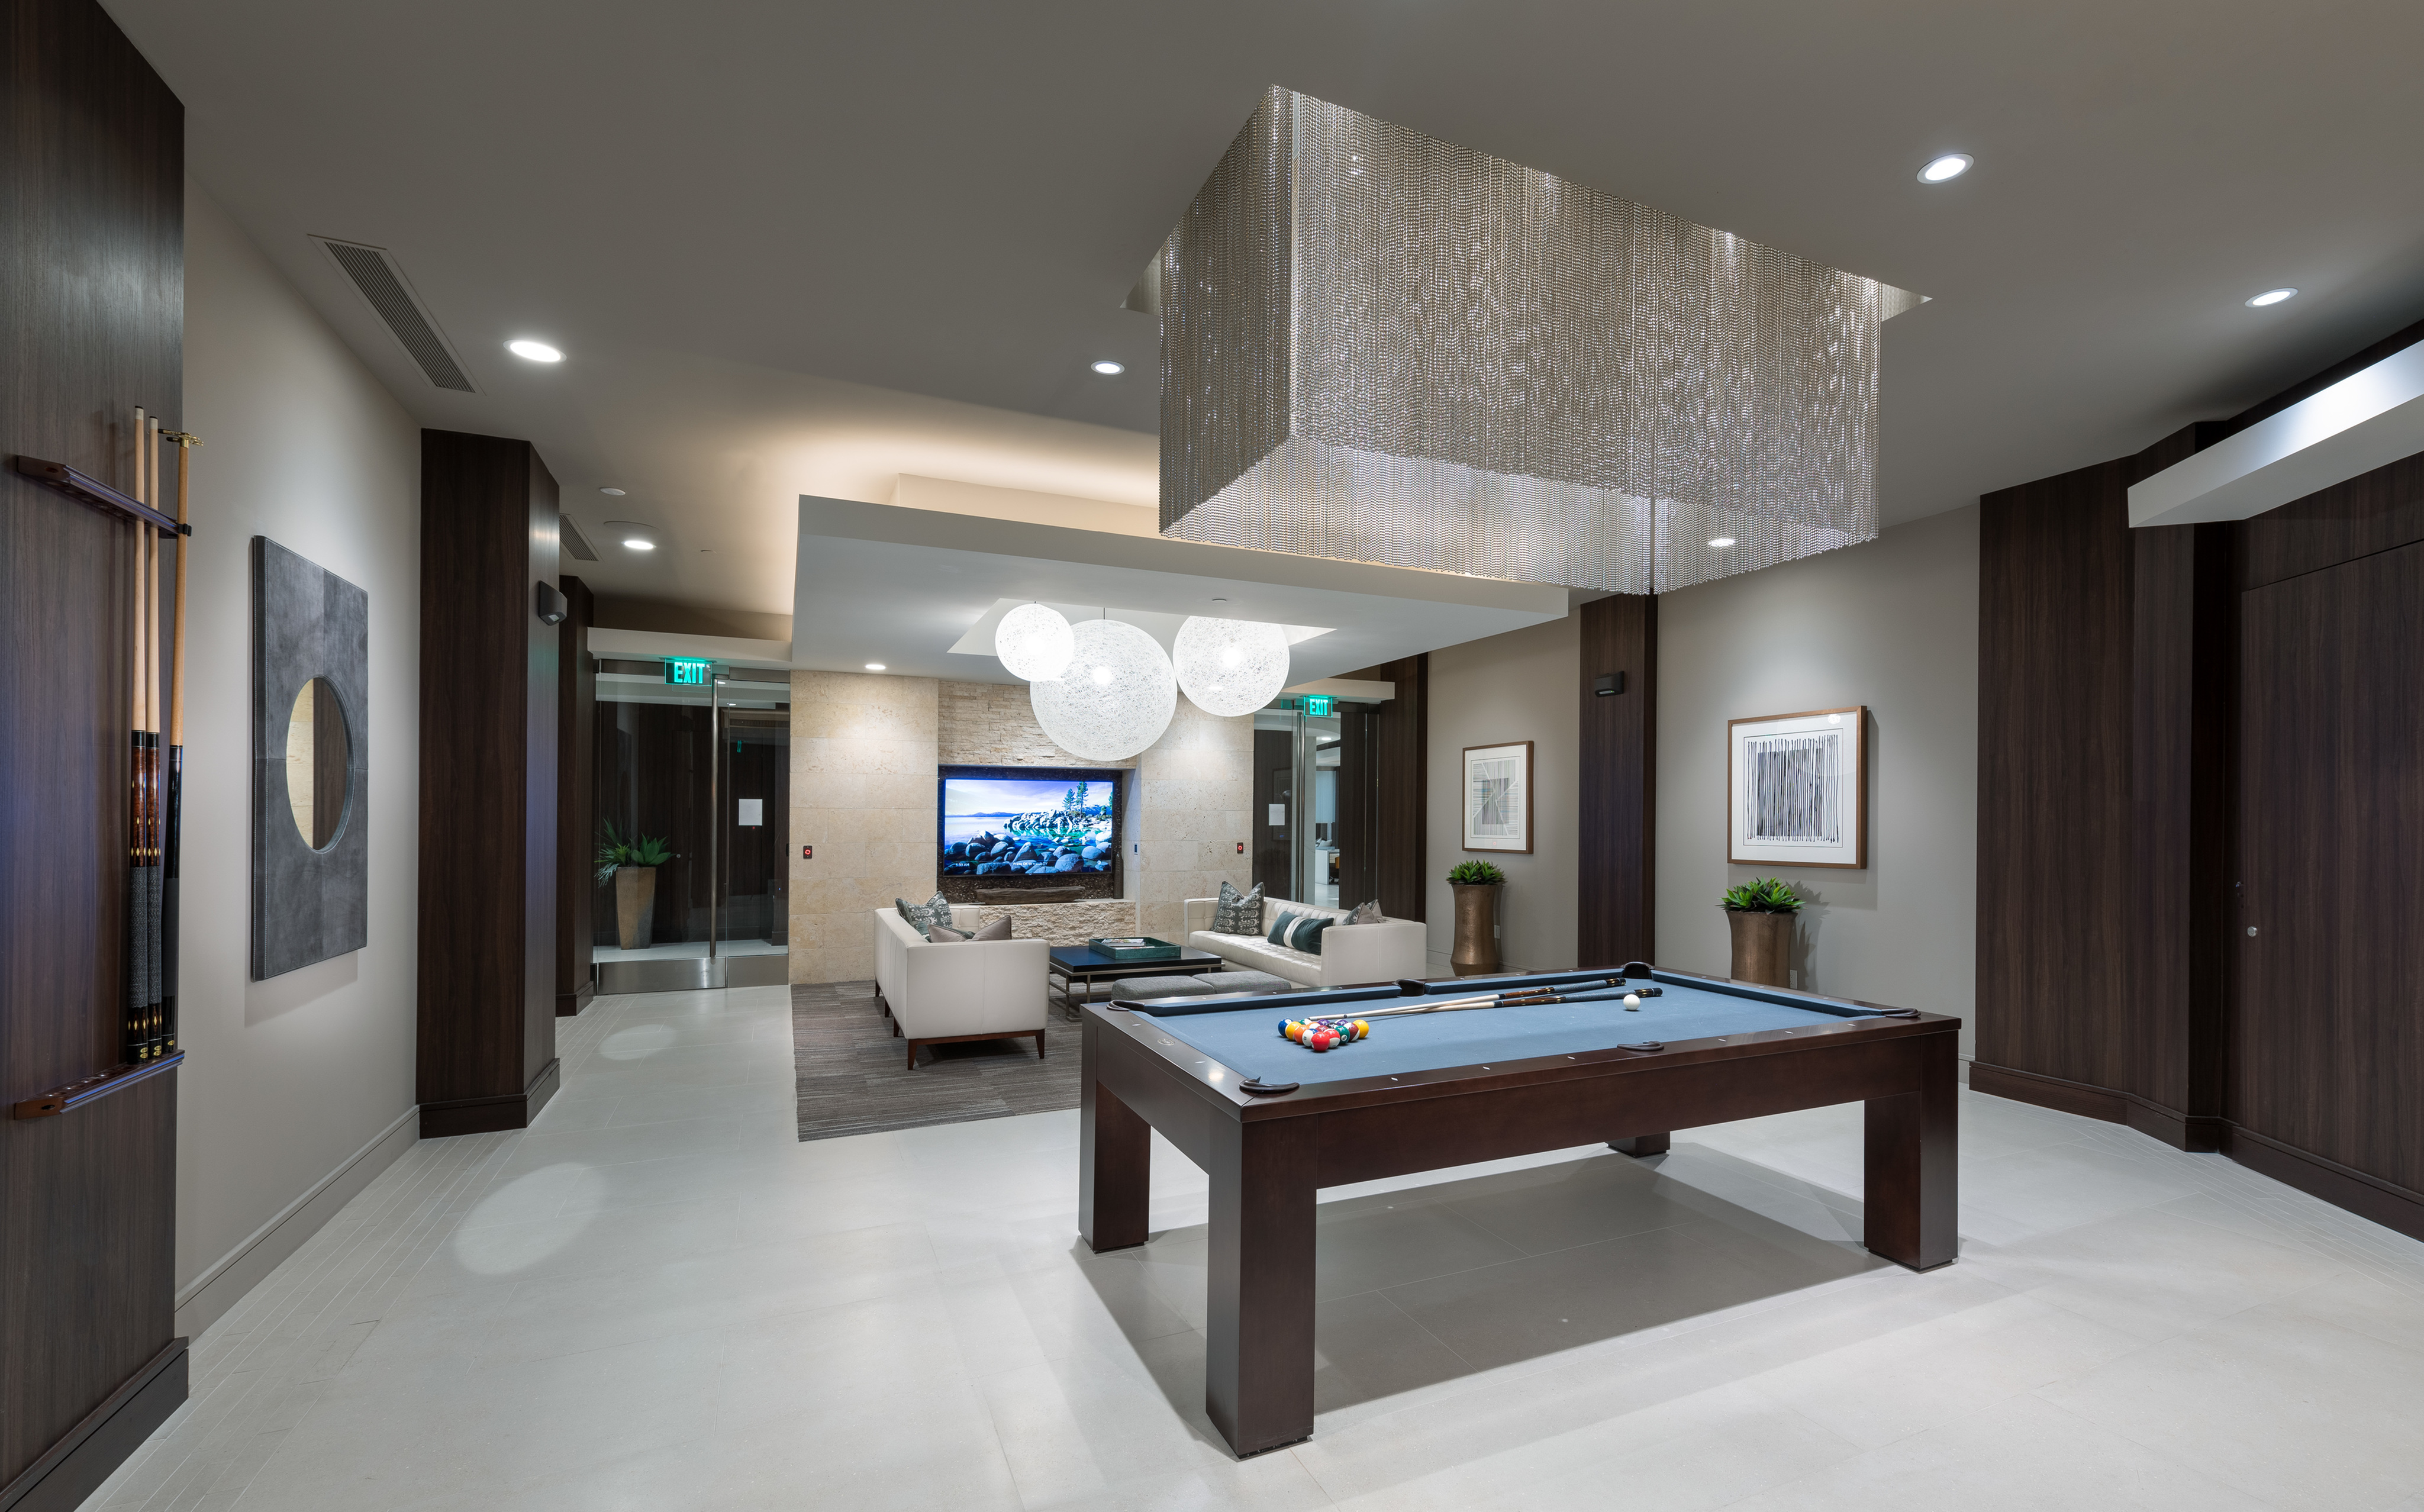 Resident lounge with billiards table and seating area at Hanover Broadway